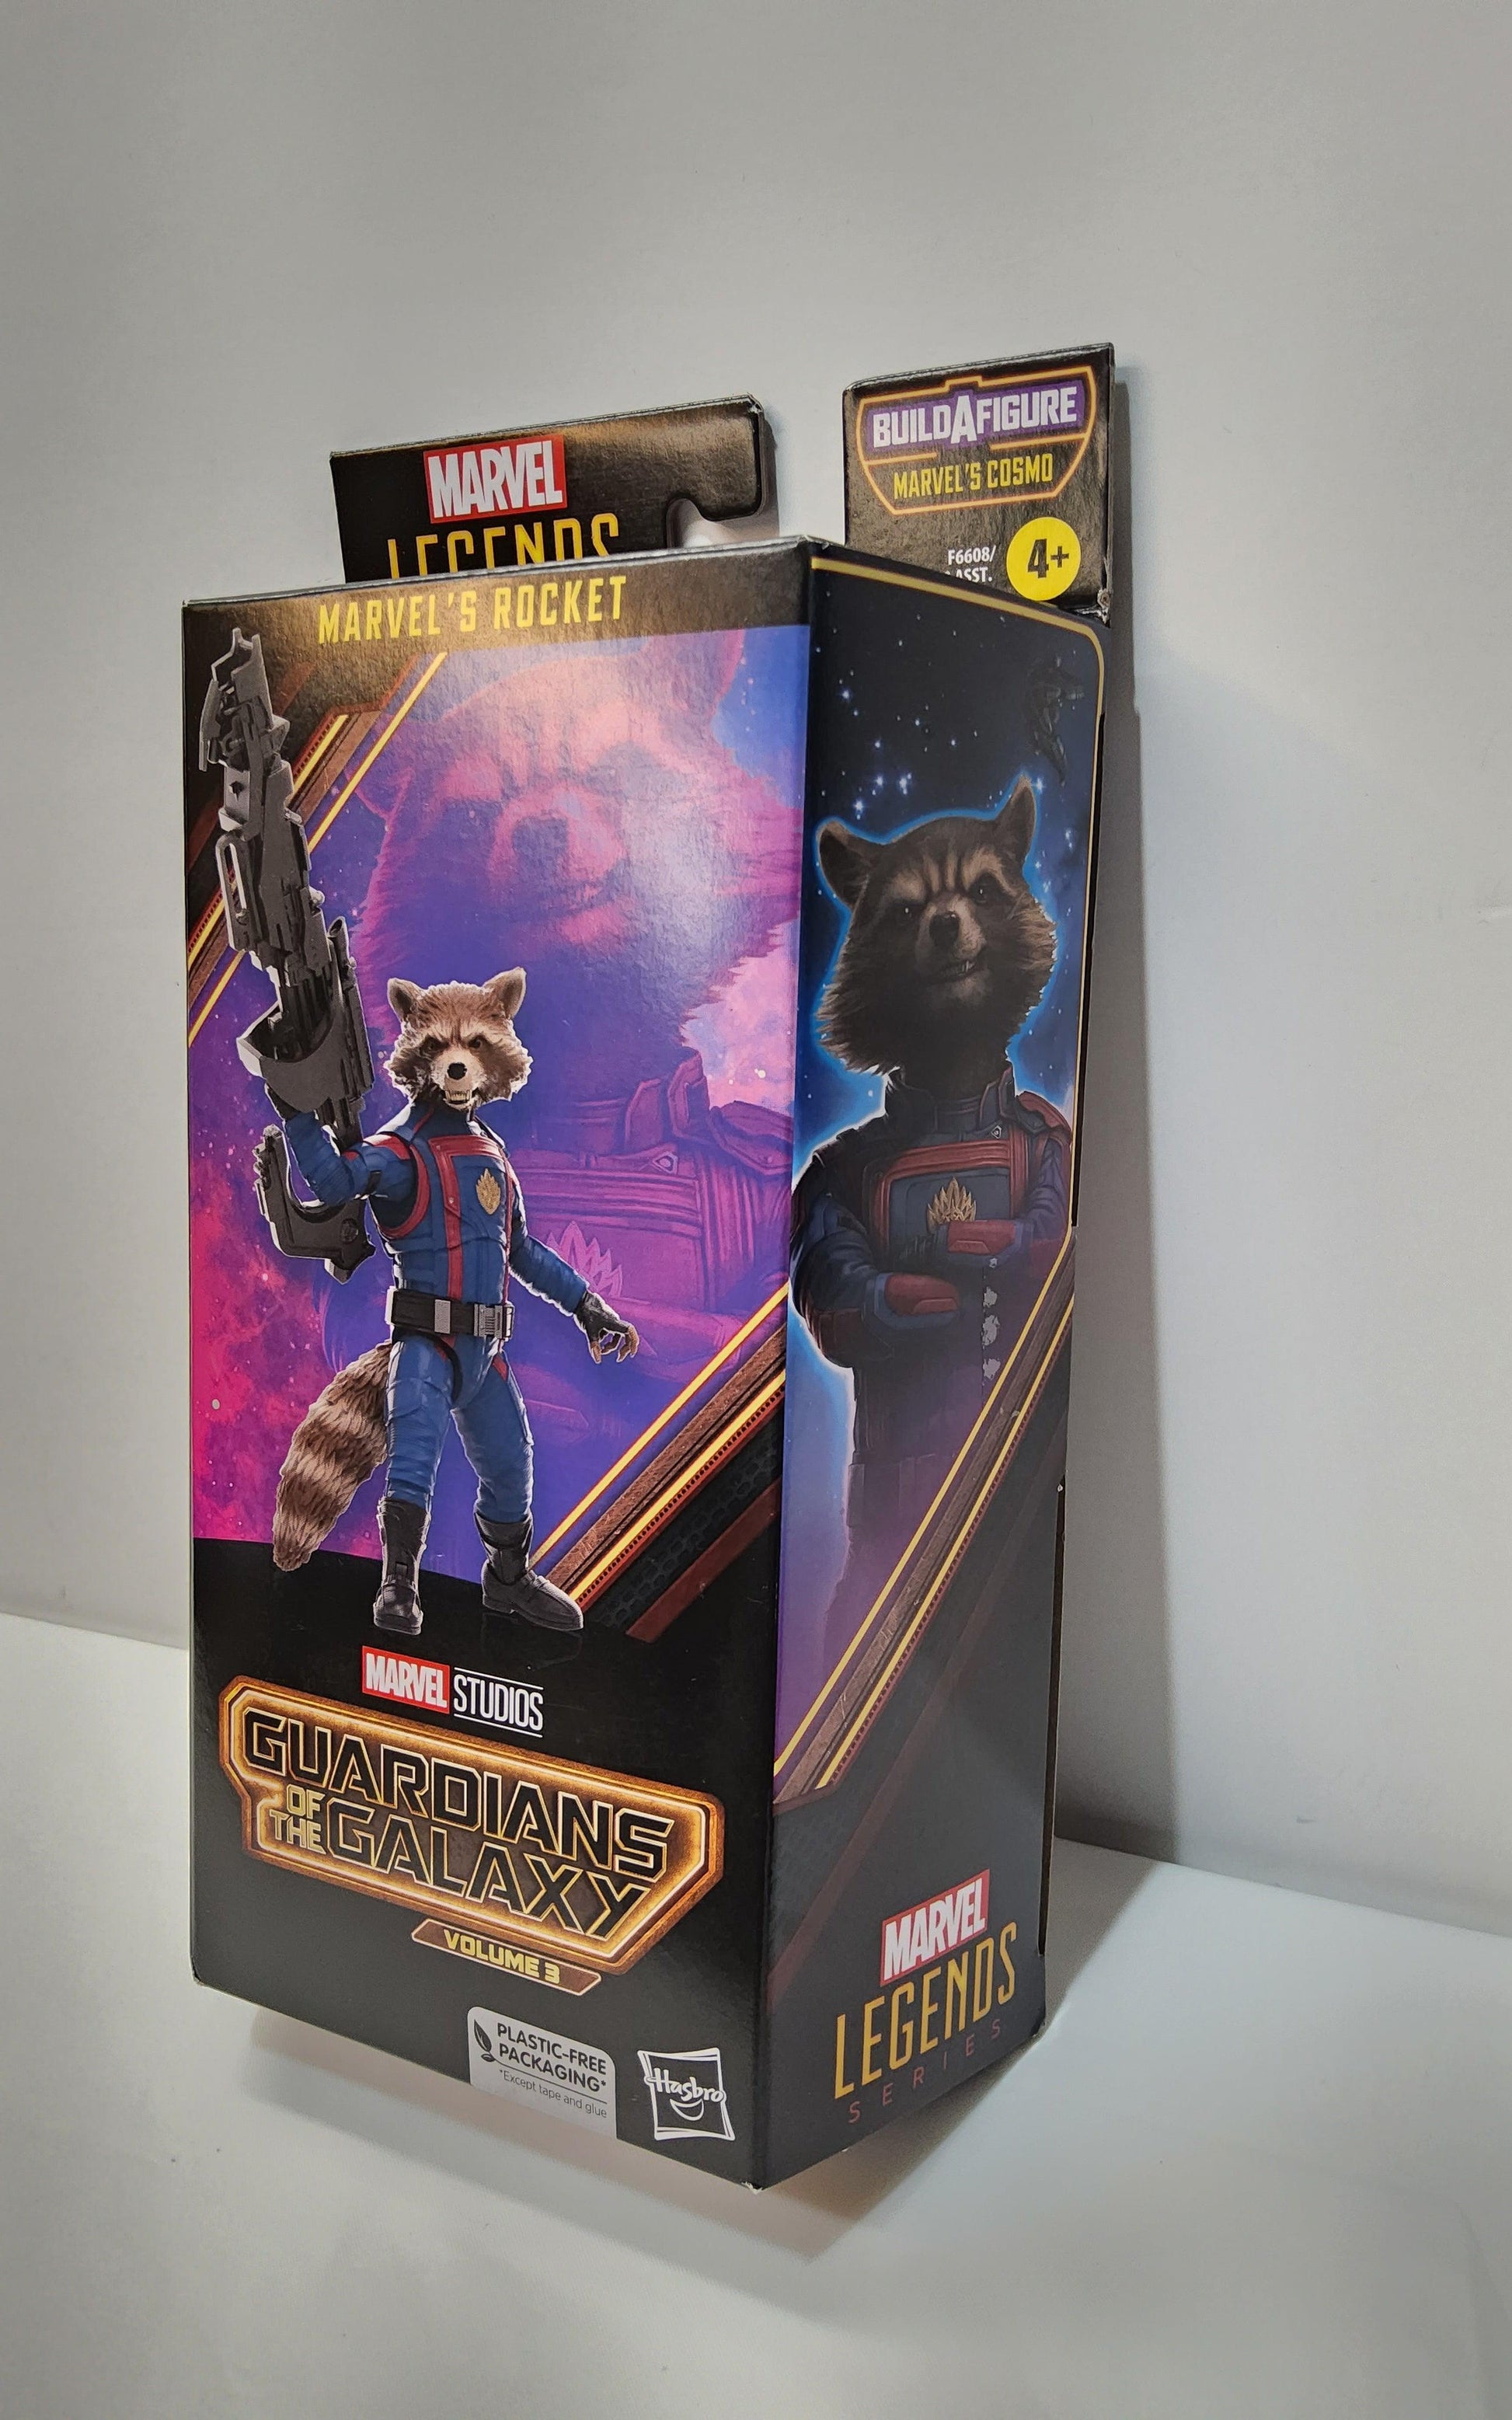 Hasbro Marvel Legends Series Guardians of the Galaxy: Volume 3 Star-Lord  (Build-A-Figure - Marvel's Cosmo) 6-in Action Figure | GameStop